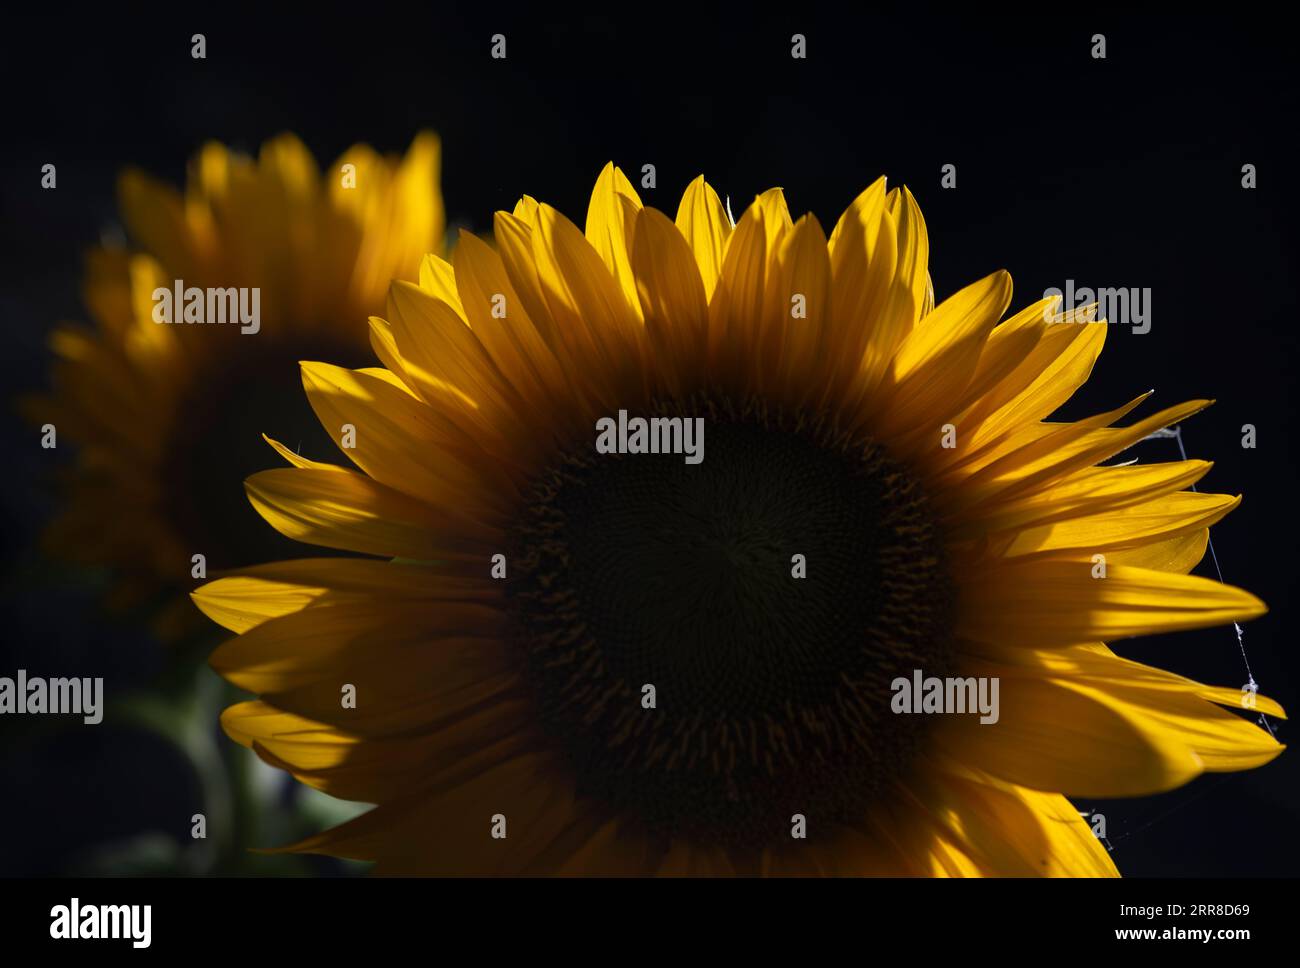 Bright yellow Sunflowers illuminated by artificial light at night, Worcestershire, England. Stock Photo